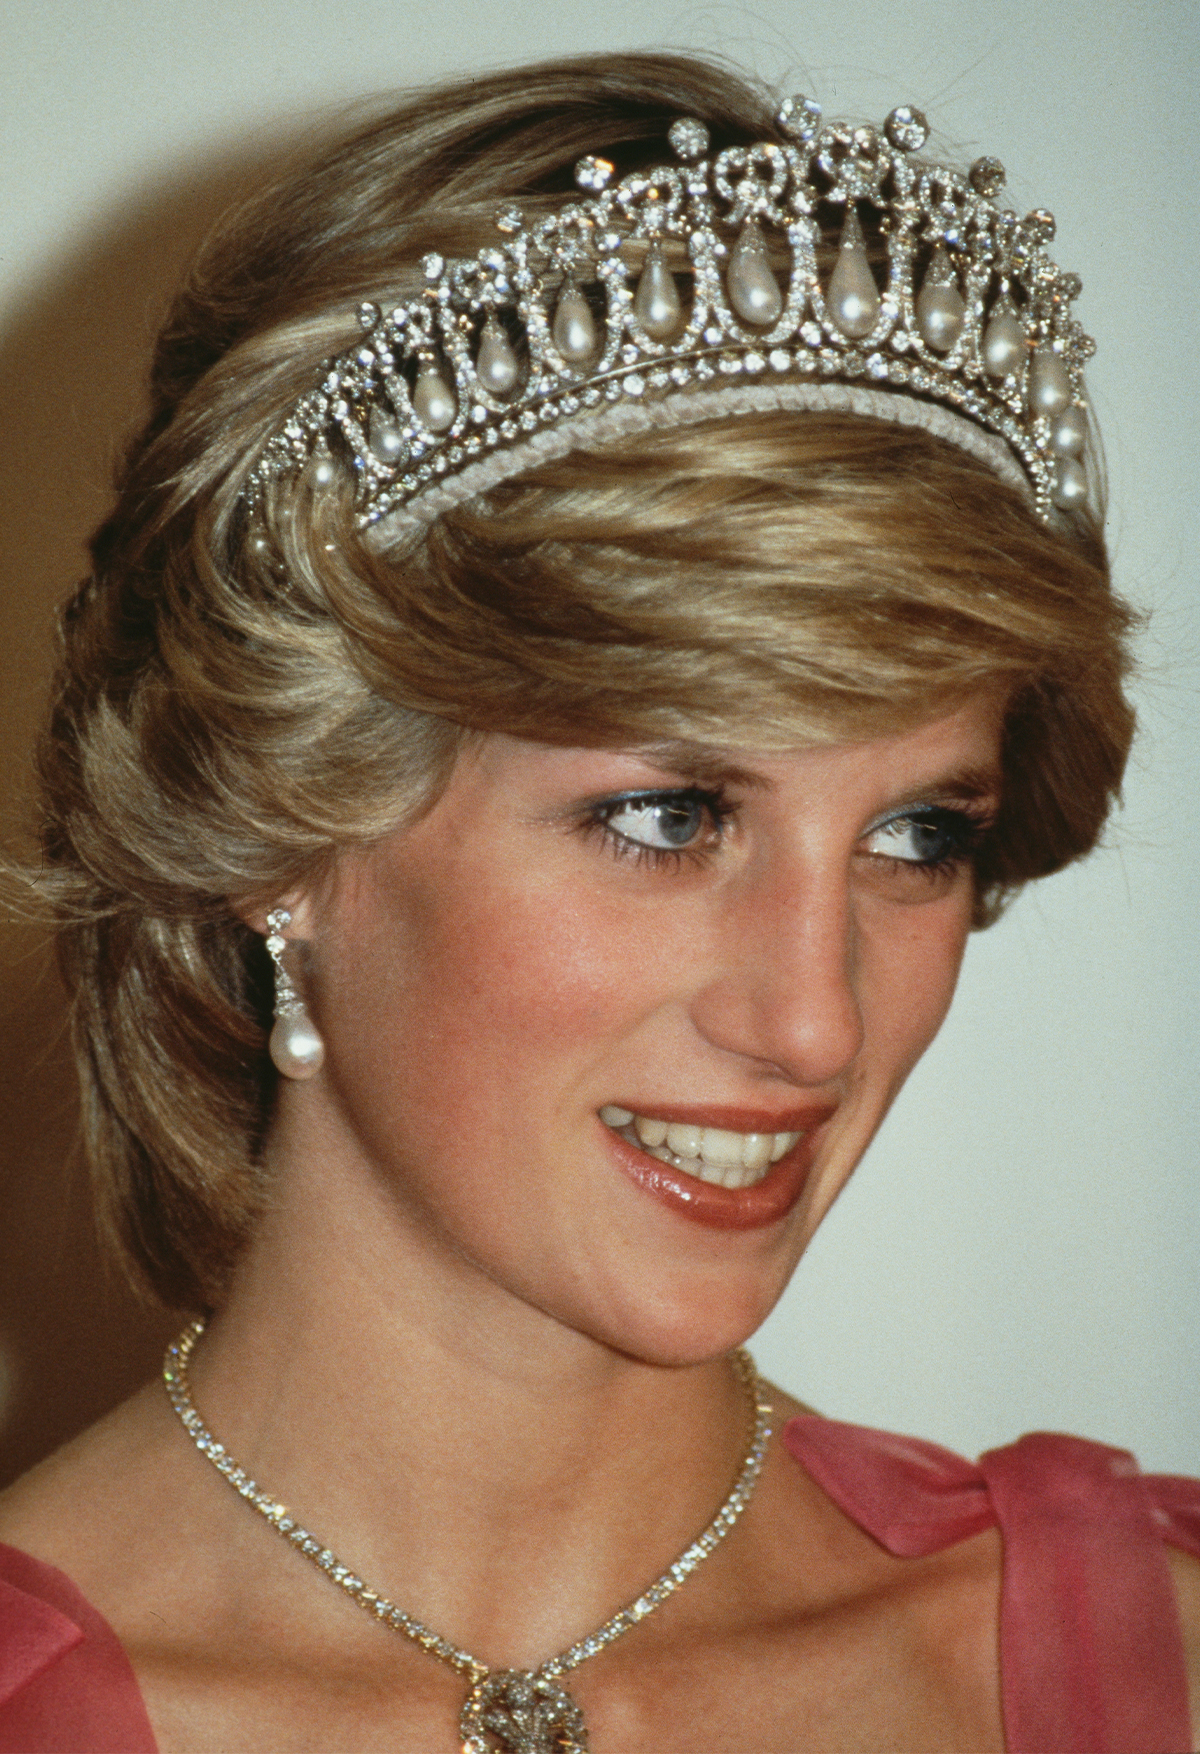 Princess Diana Was a Style Icon, But We Need to Talk About Her Beauty Looks Too